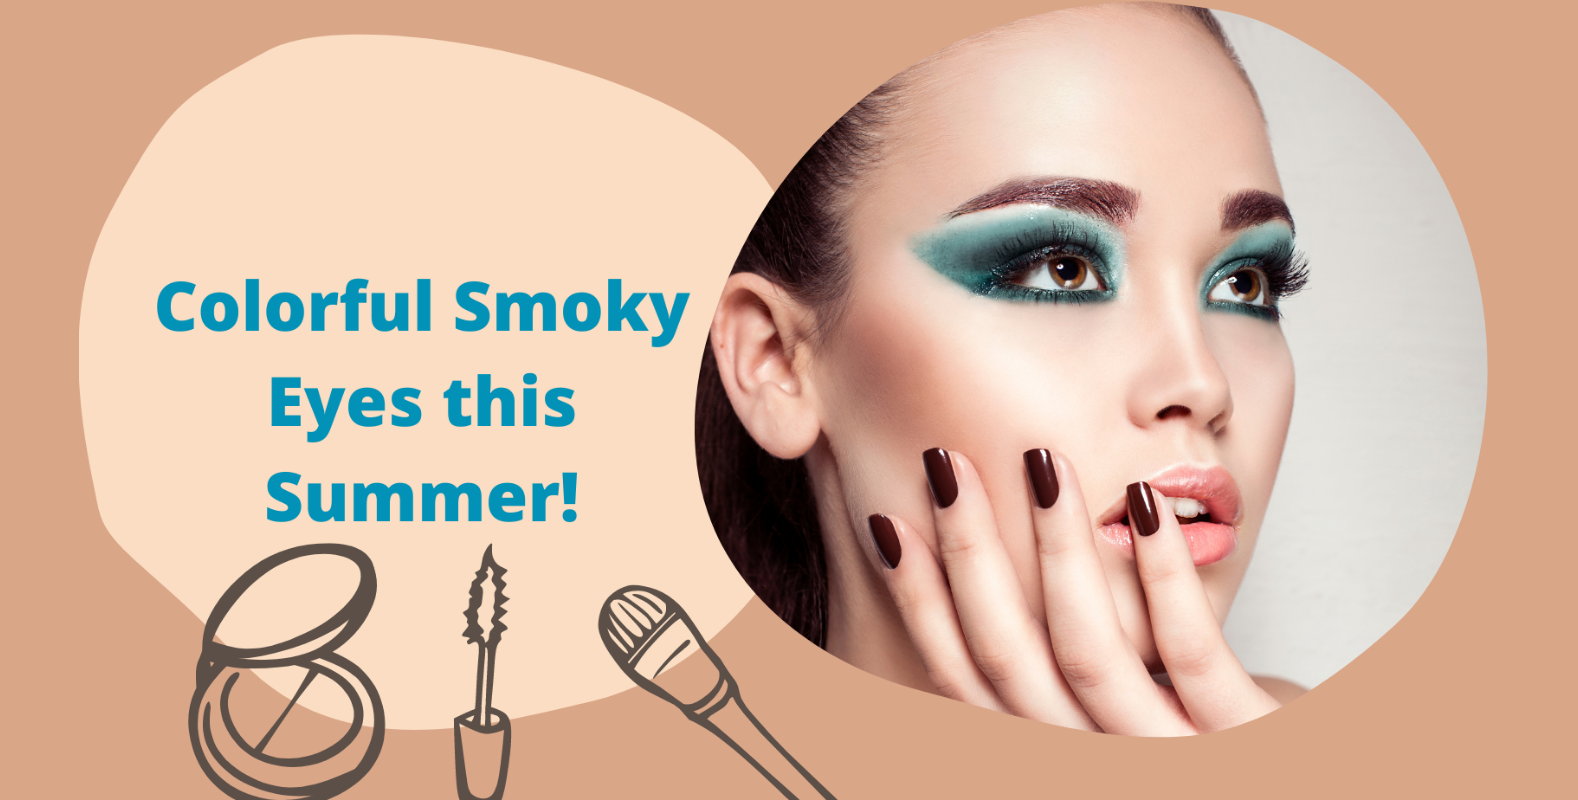 Colorful Smoky Eyes this Summer!